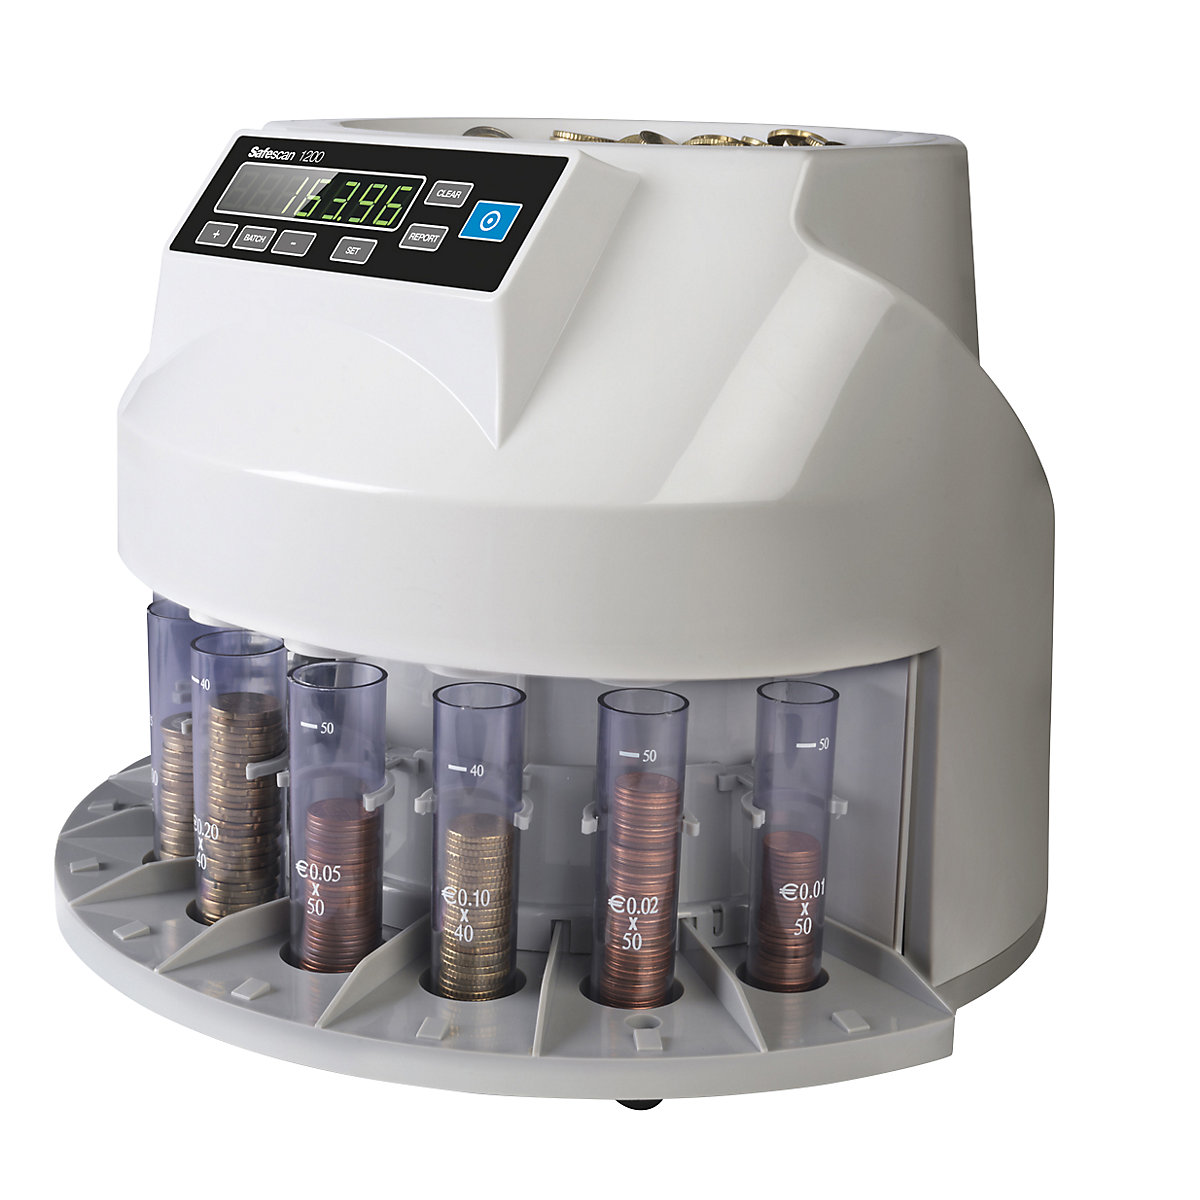 Coin counters and sorters – Safescan (Product illustration 3)-2